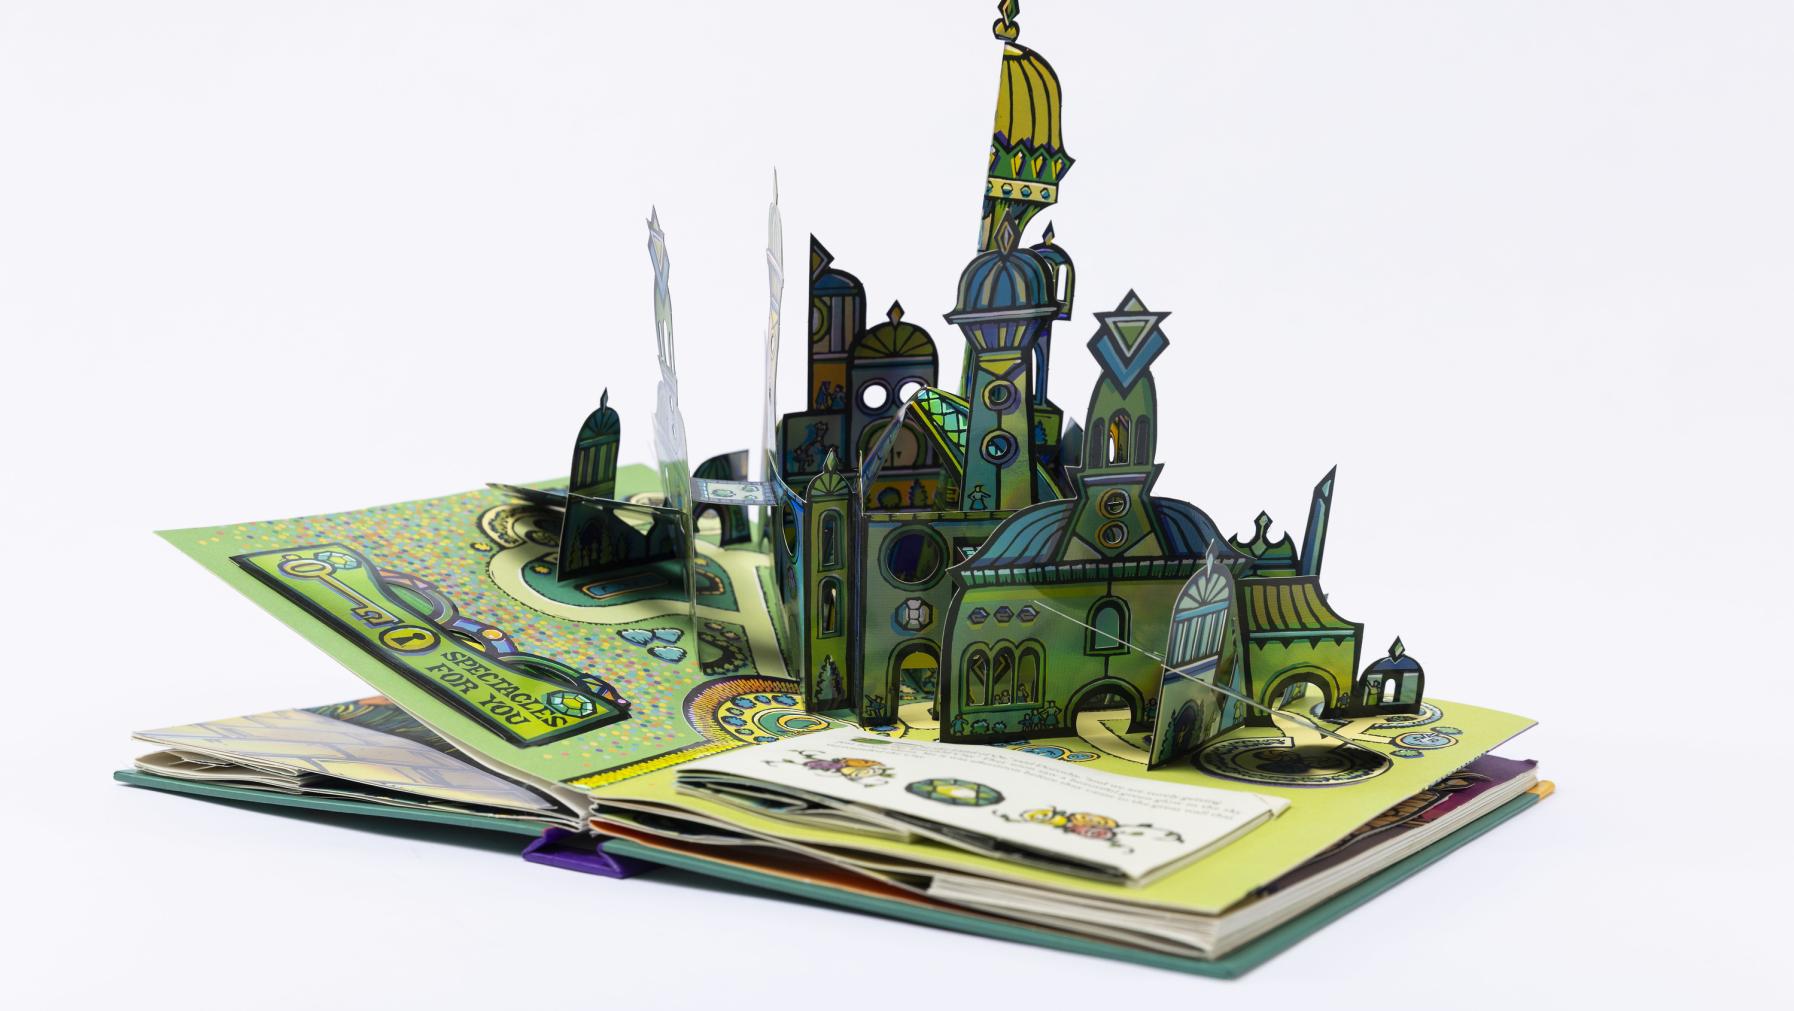 The Emerald City emerges from the pages of a pop-up book version of The Wizard of Oz.